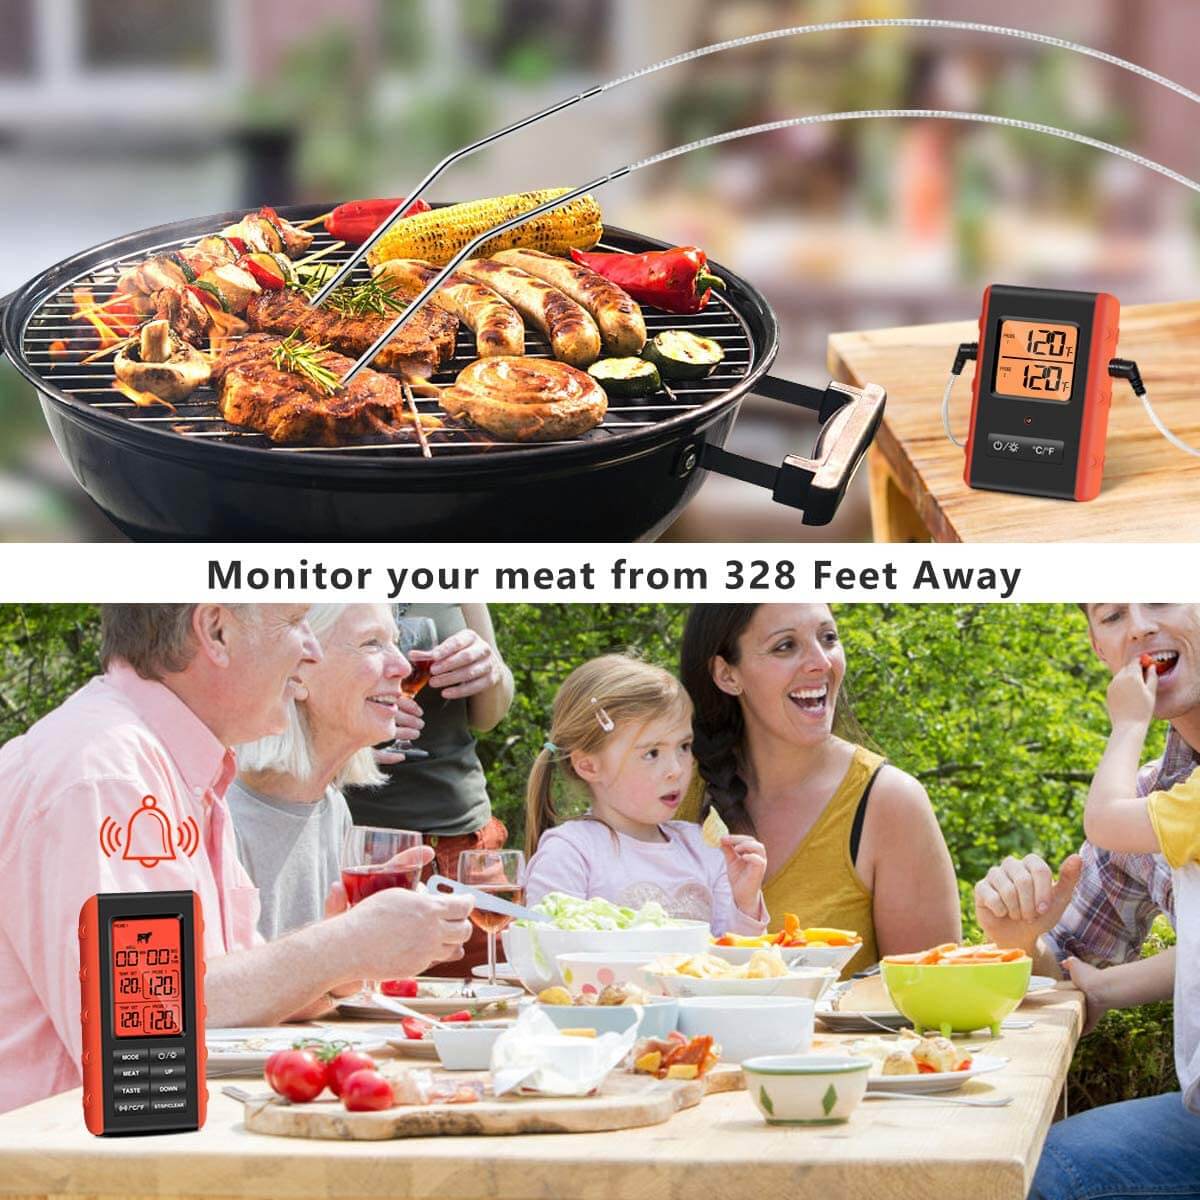 Wireless Digital Bluetooth Smart Bbq/oven Grill Meat Thermometer 2 In 1 For  Meat Food Smoker BBQ Charcoal Grill And Oven Smoker